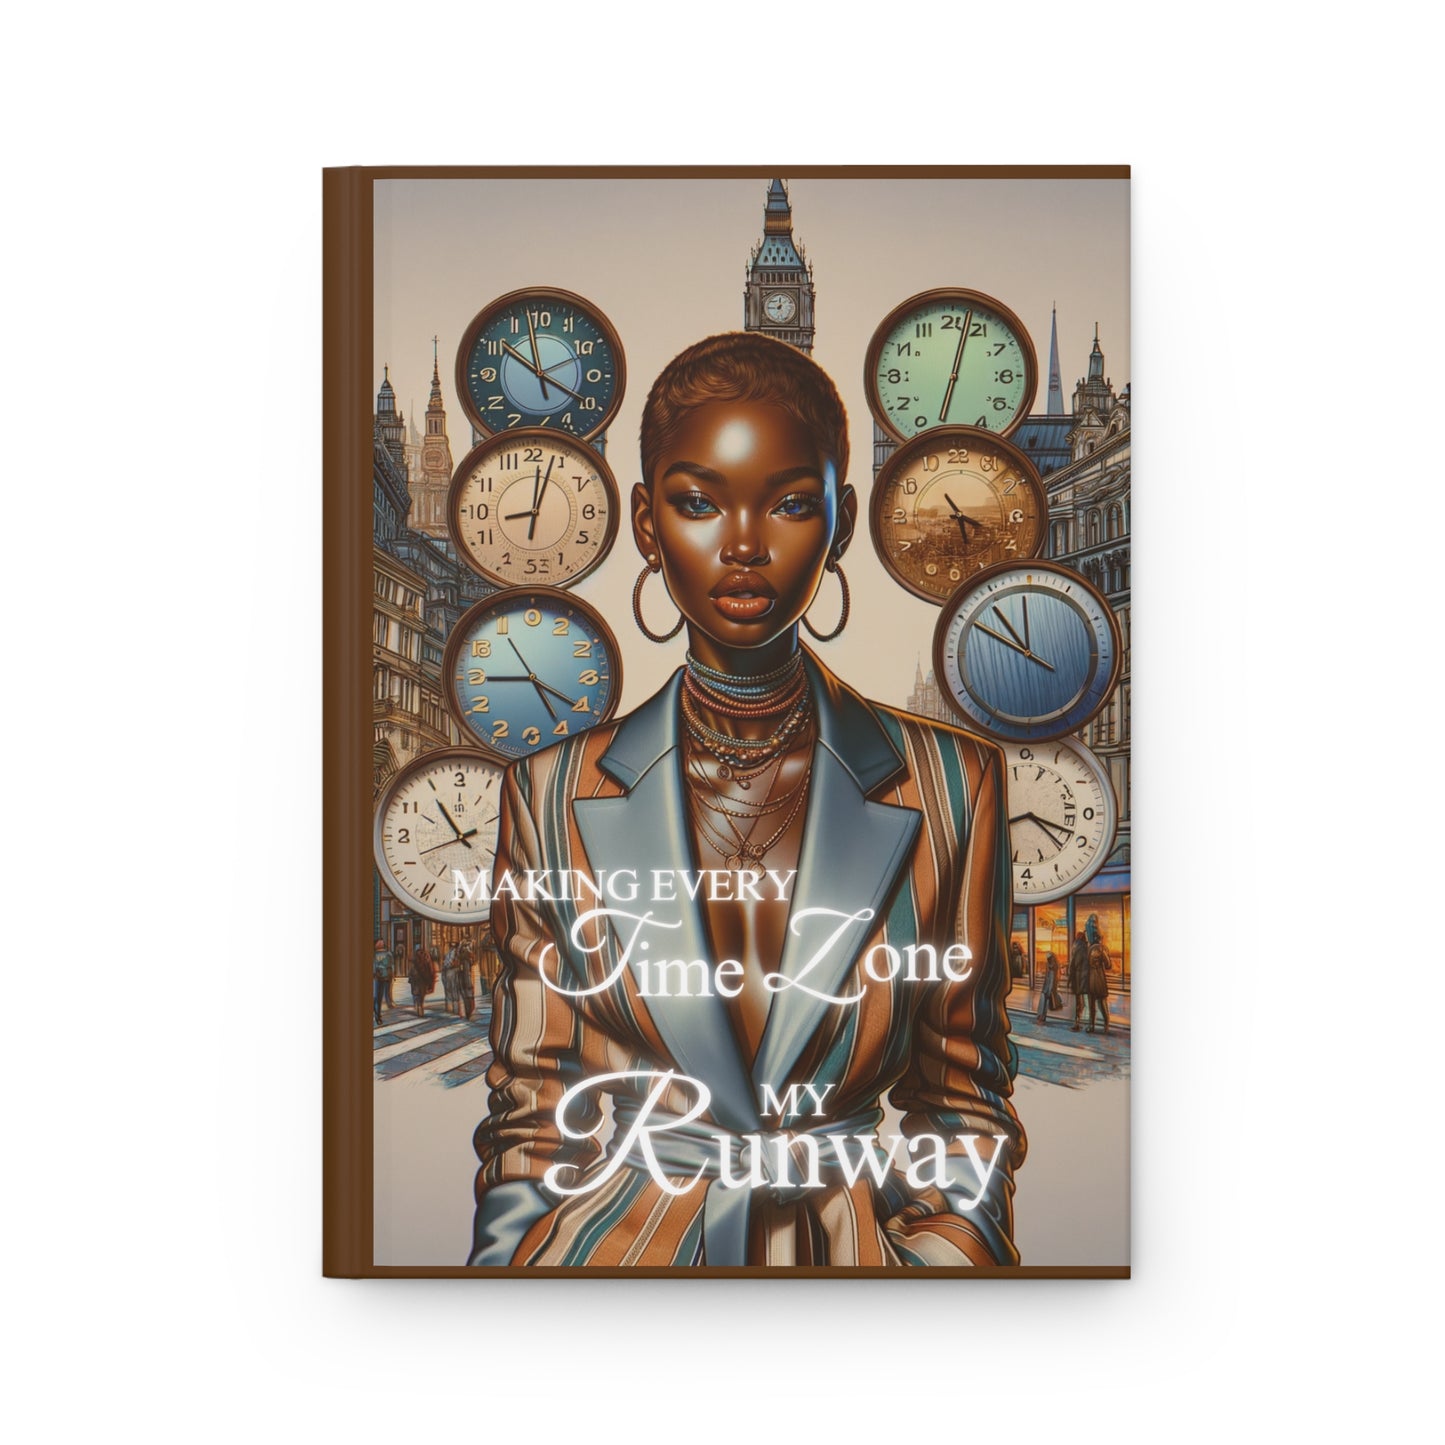 Making Every Time Zone My Runway Hardcover Journal Matte